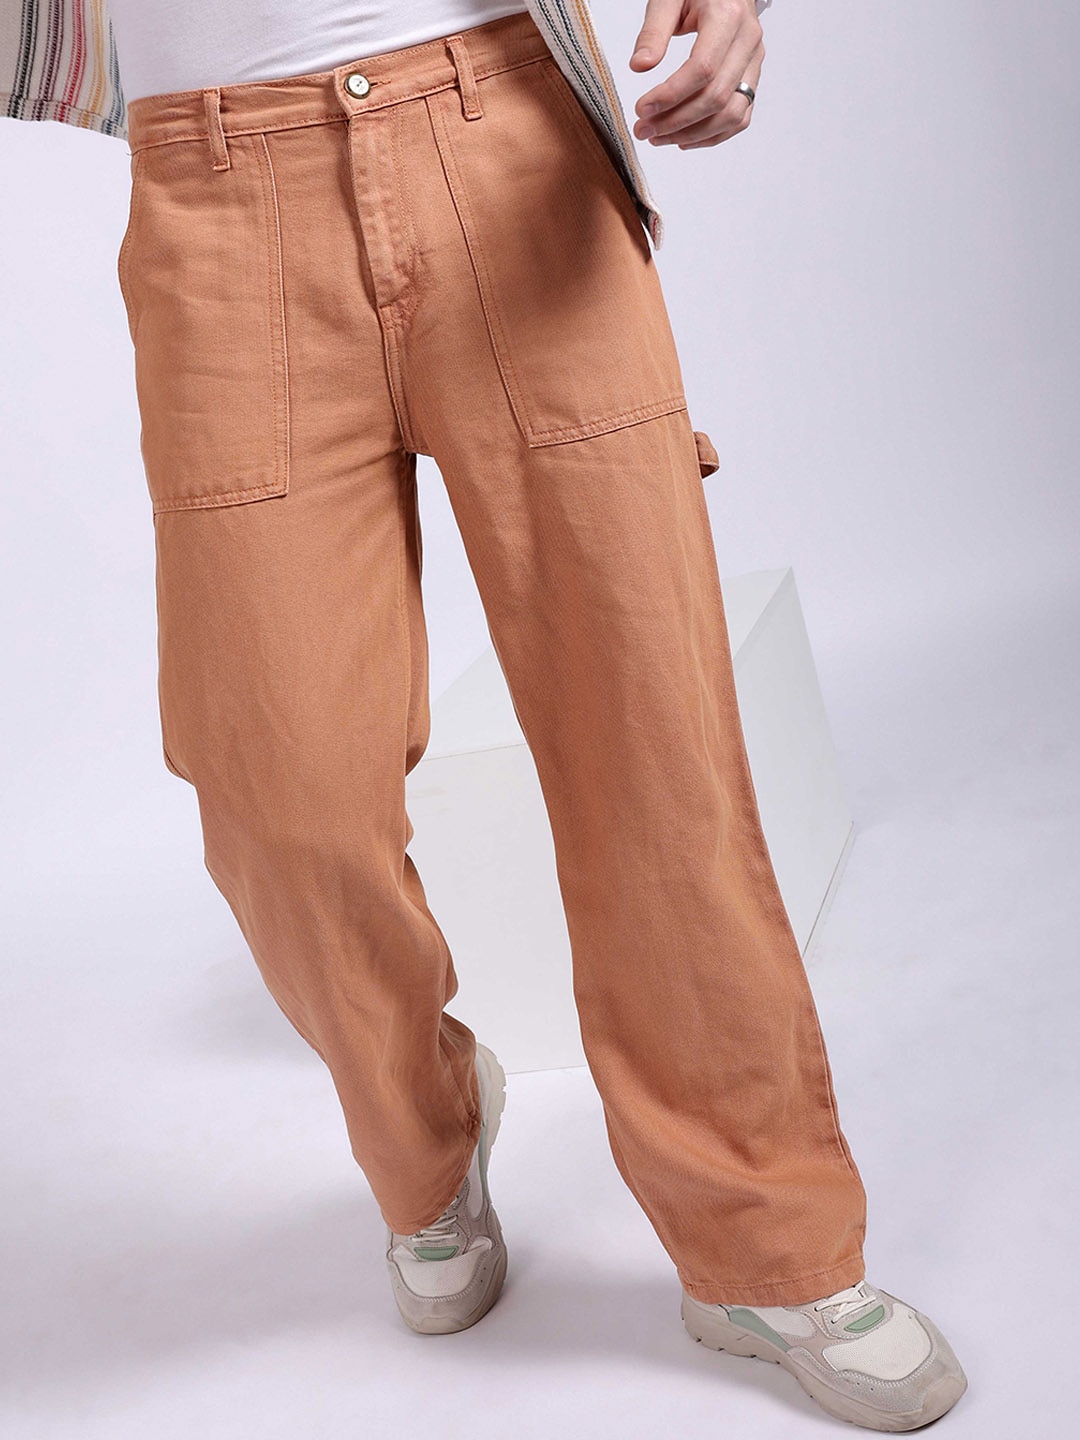 The Indian Garage Co Men Relaxed Fit Stretchable Jeans